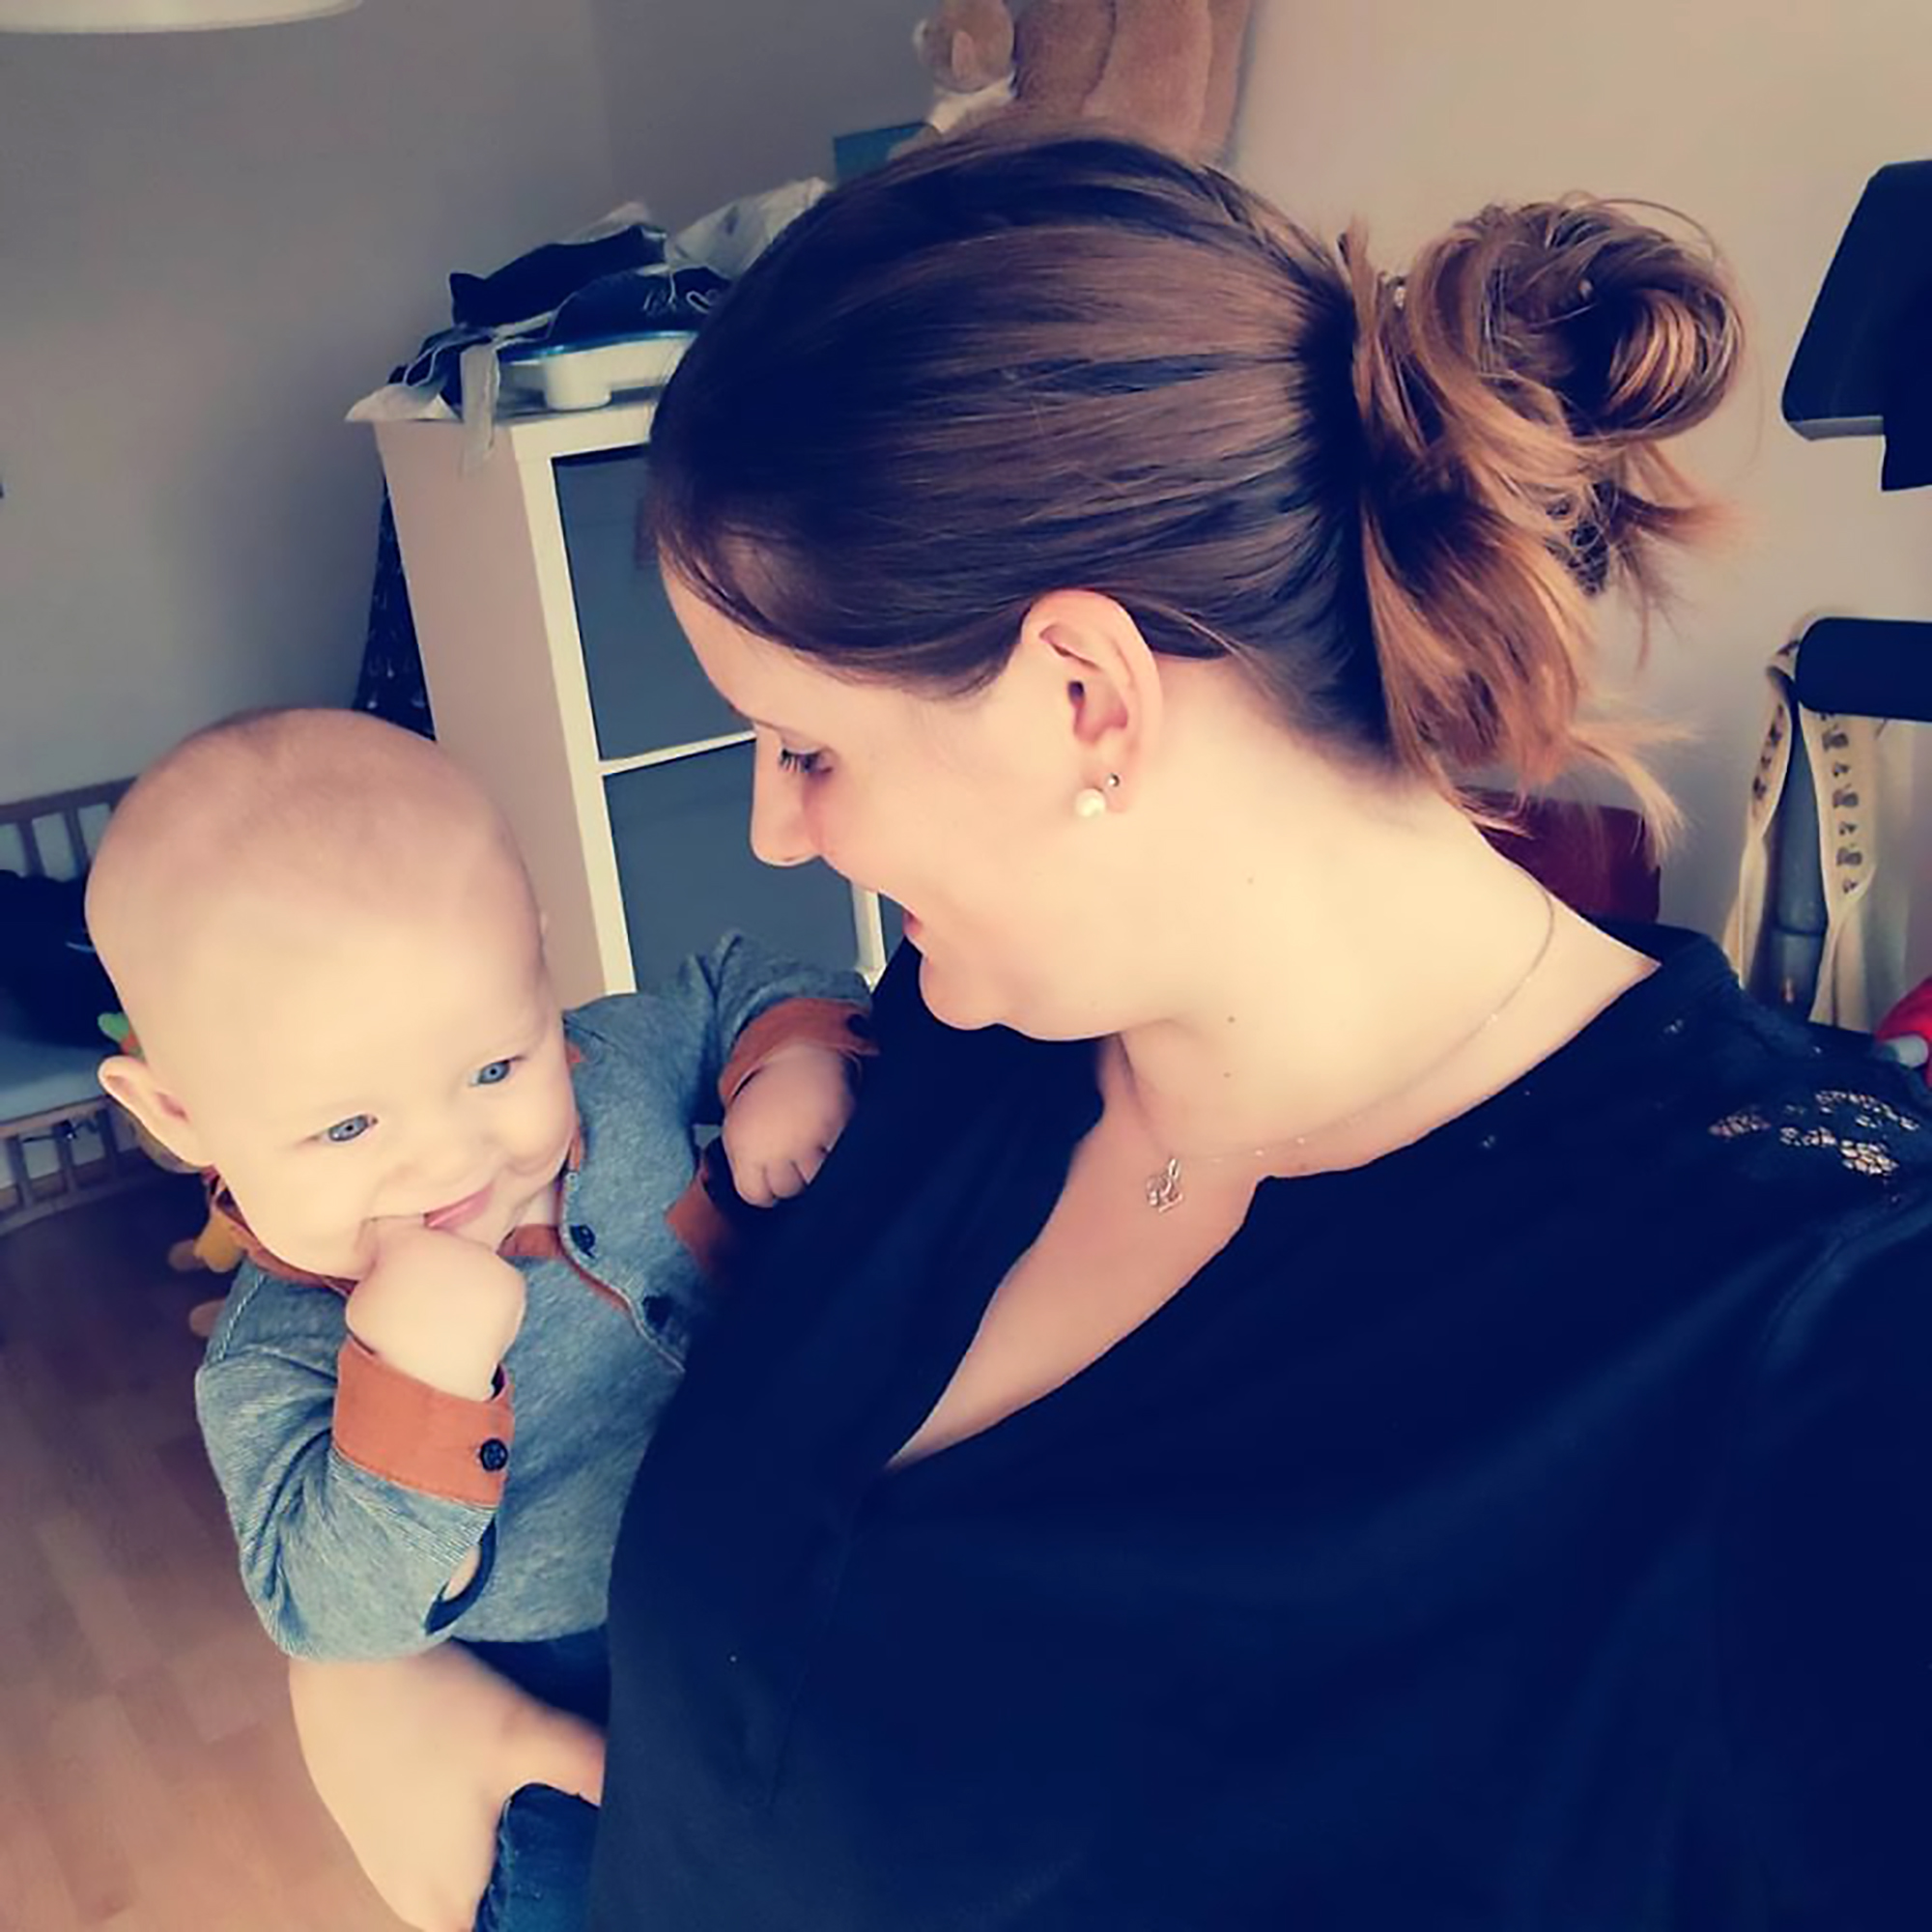 Read more about the article Breastfeeding Mum Thrown Out Of Zara Store